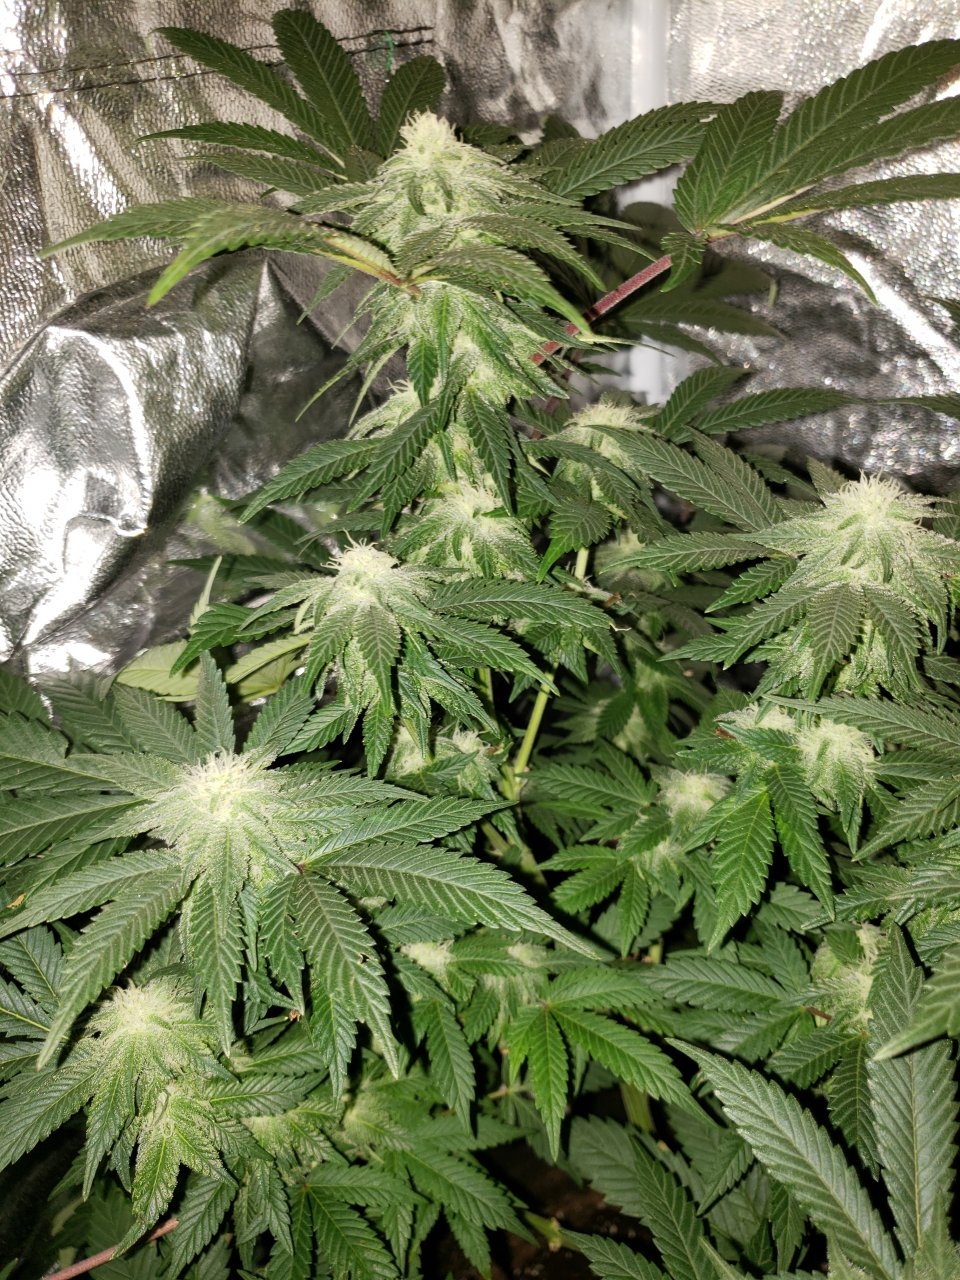 Blue cheese budporn day 31 of flower